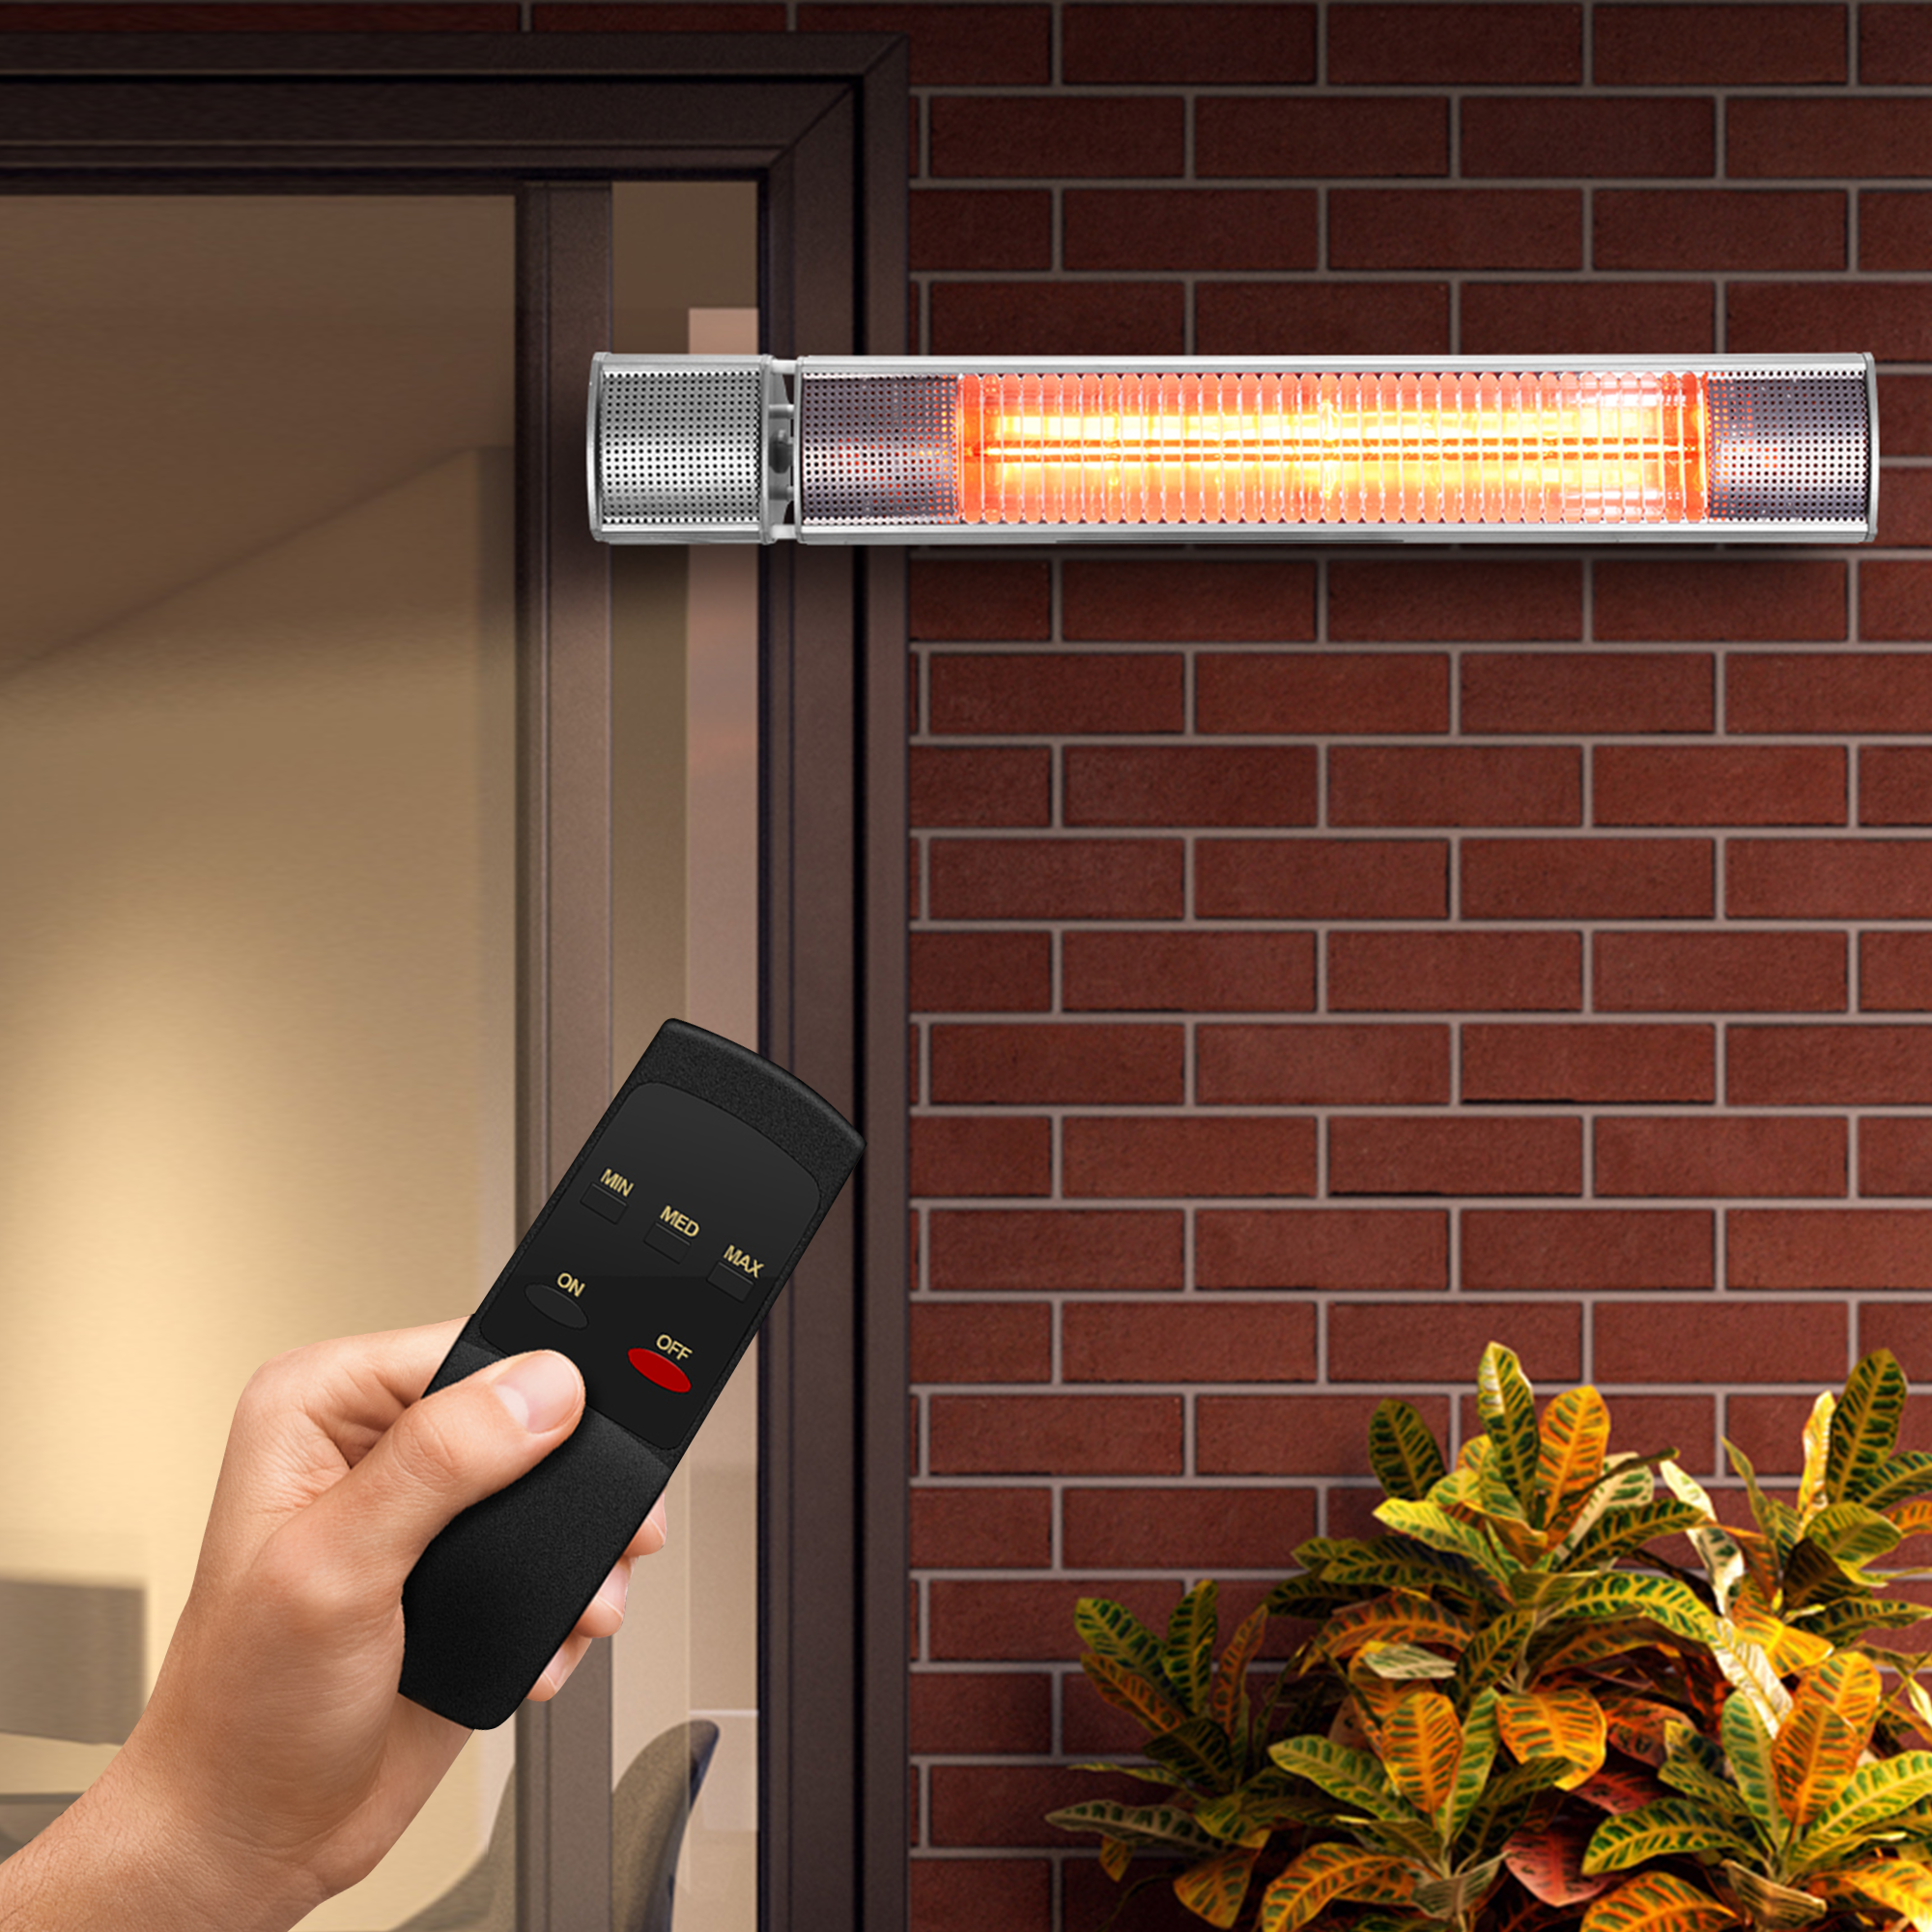 BillyOh Alberta Wall Mounted Electric Infrared Patio Heater - Wall Mounted Electric infrared patio heater